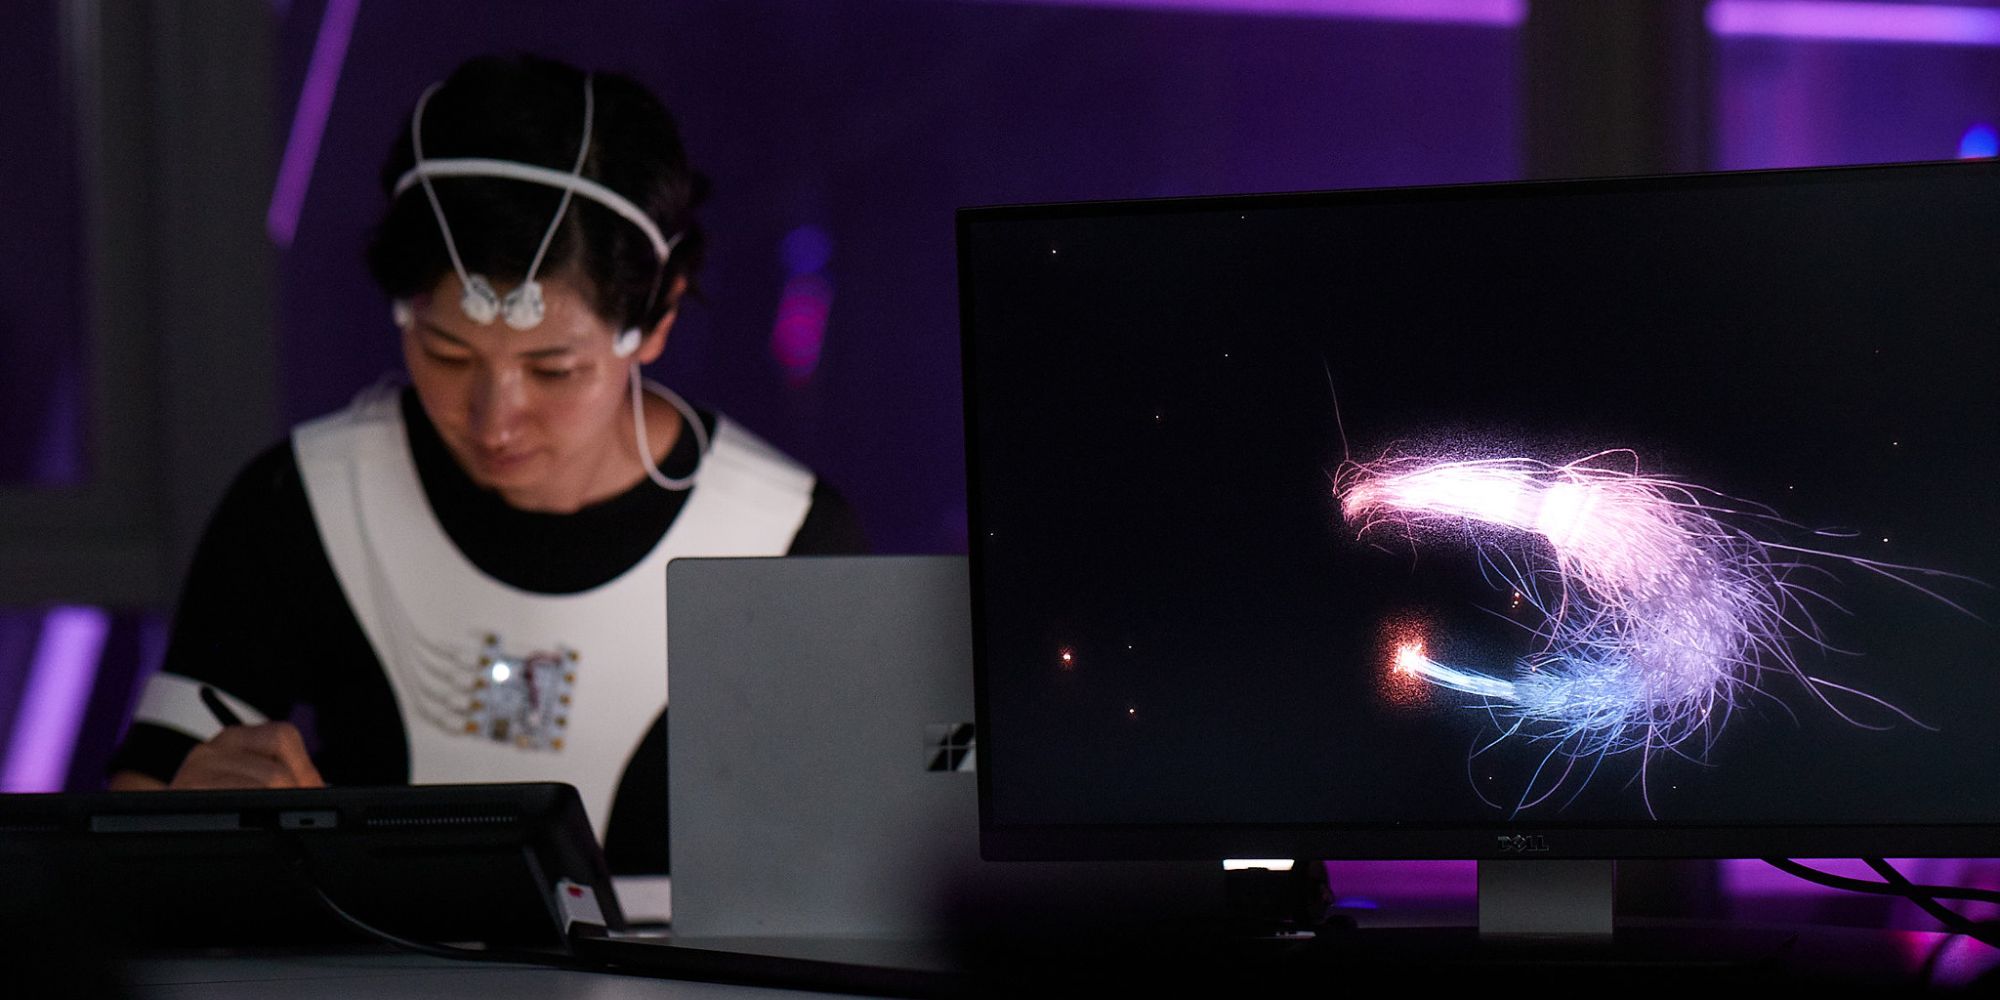 Life Ink shows the creative moment when artist Emiko Ogawa, Head of Prix Ars Electronica, is immersed in her drawings.